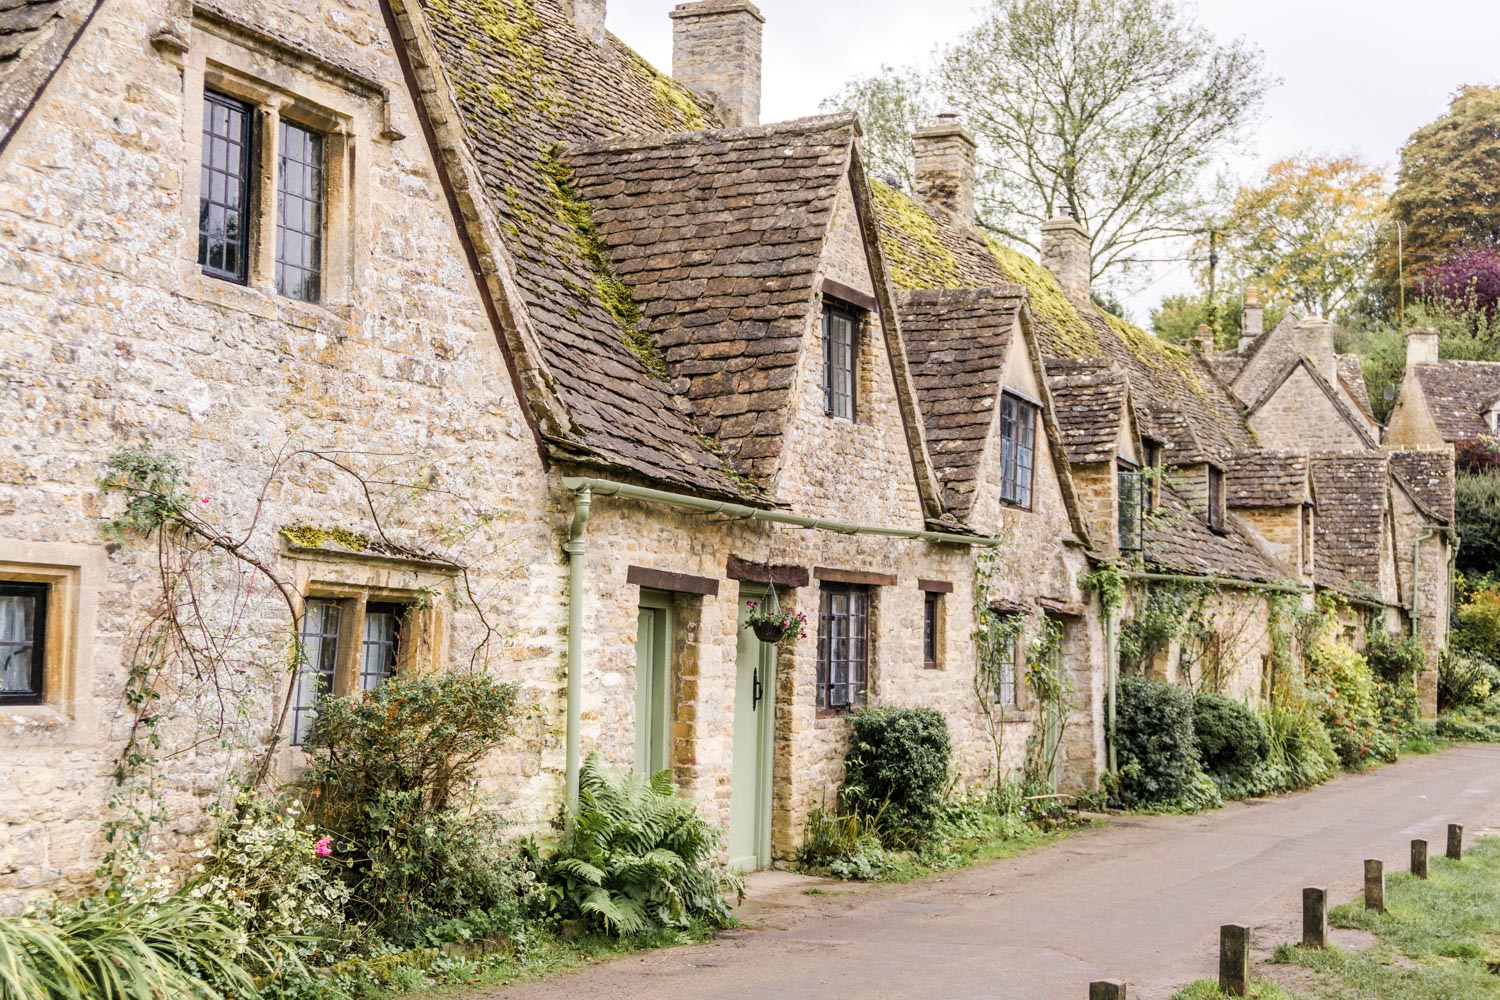 Road trip to the Cotswolds – The Slaughters, Stow-on-the-Wold, Burford, Bibury